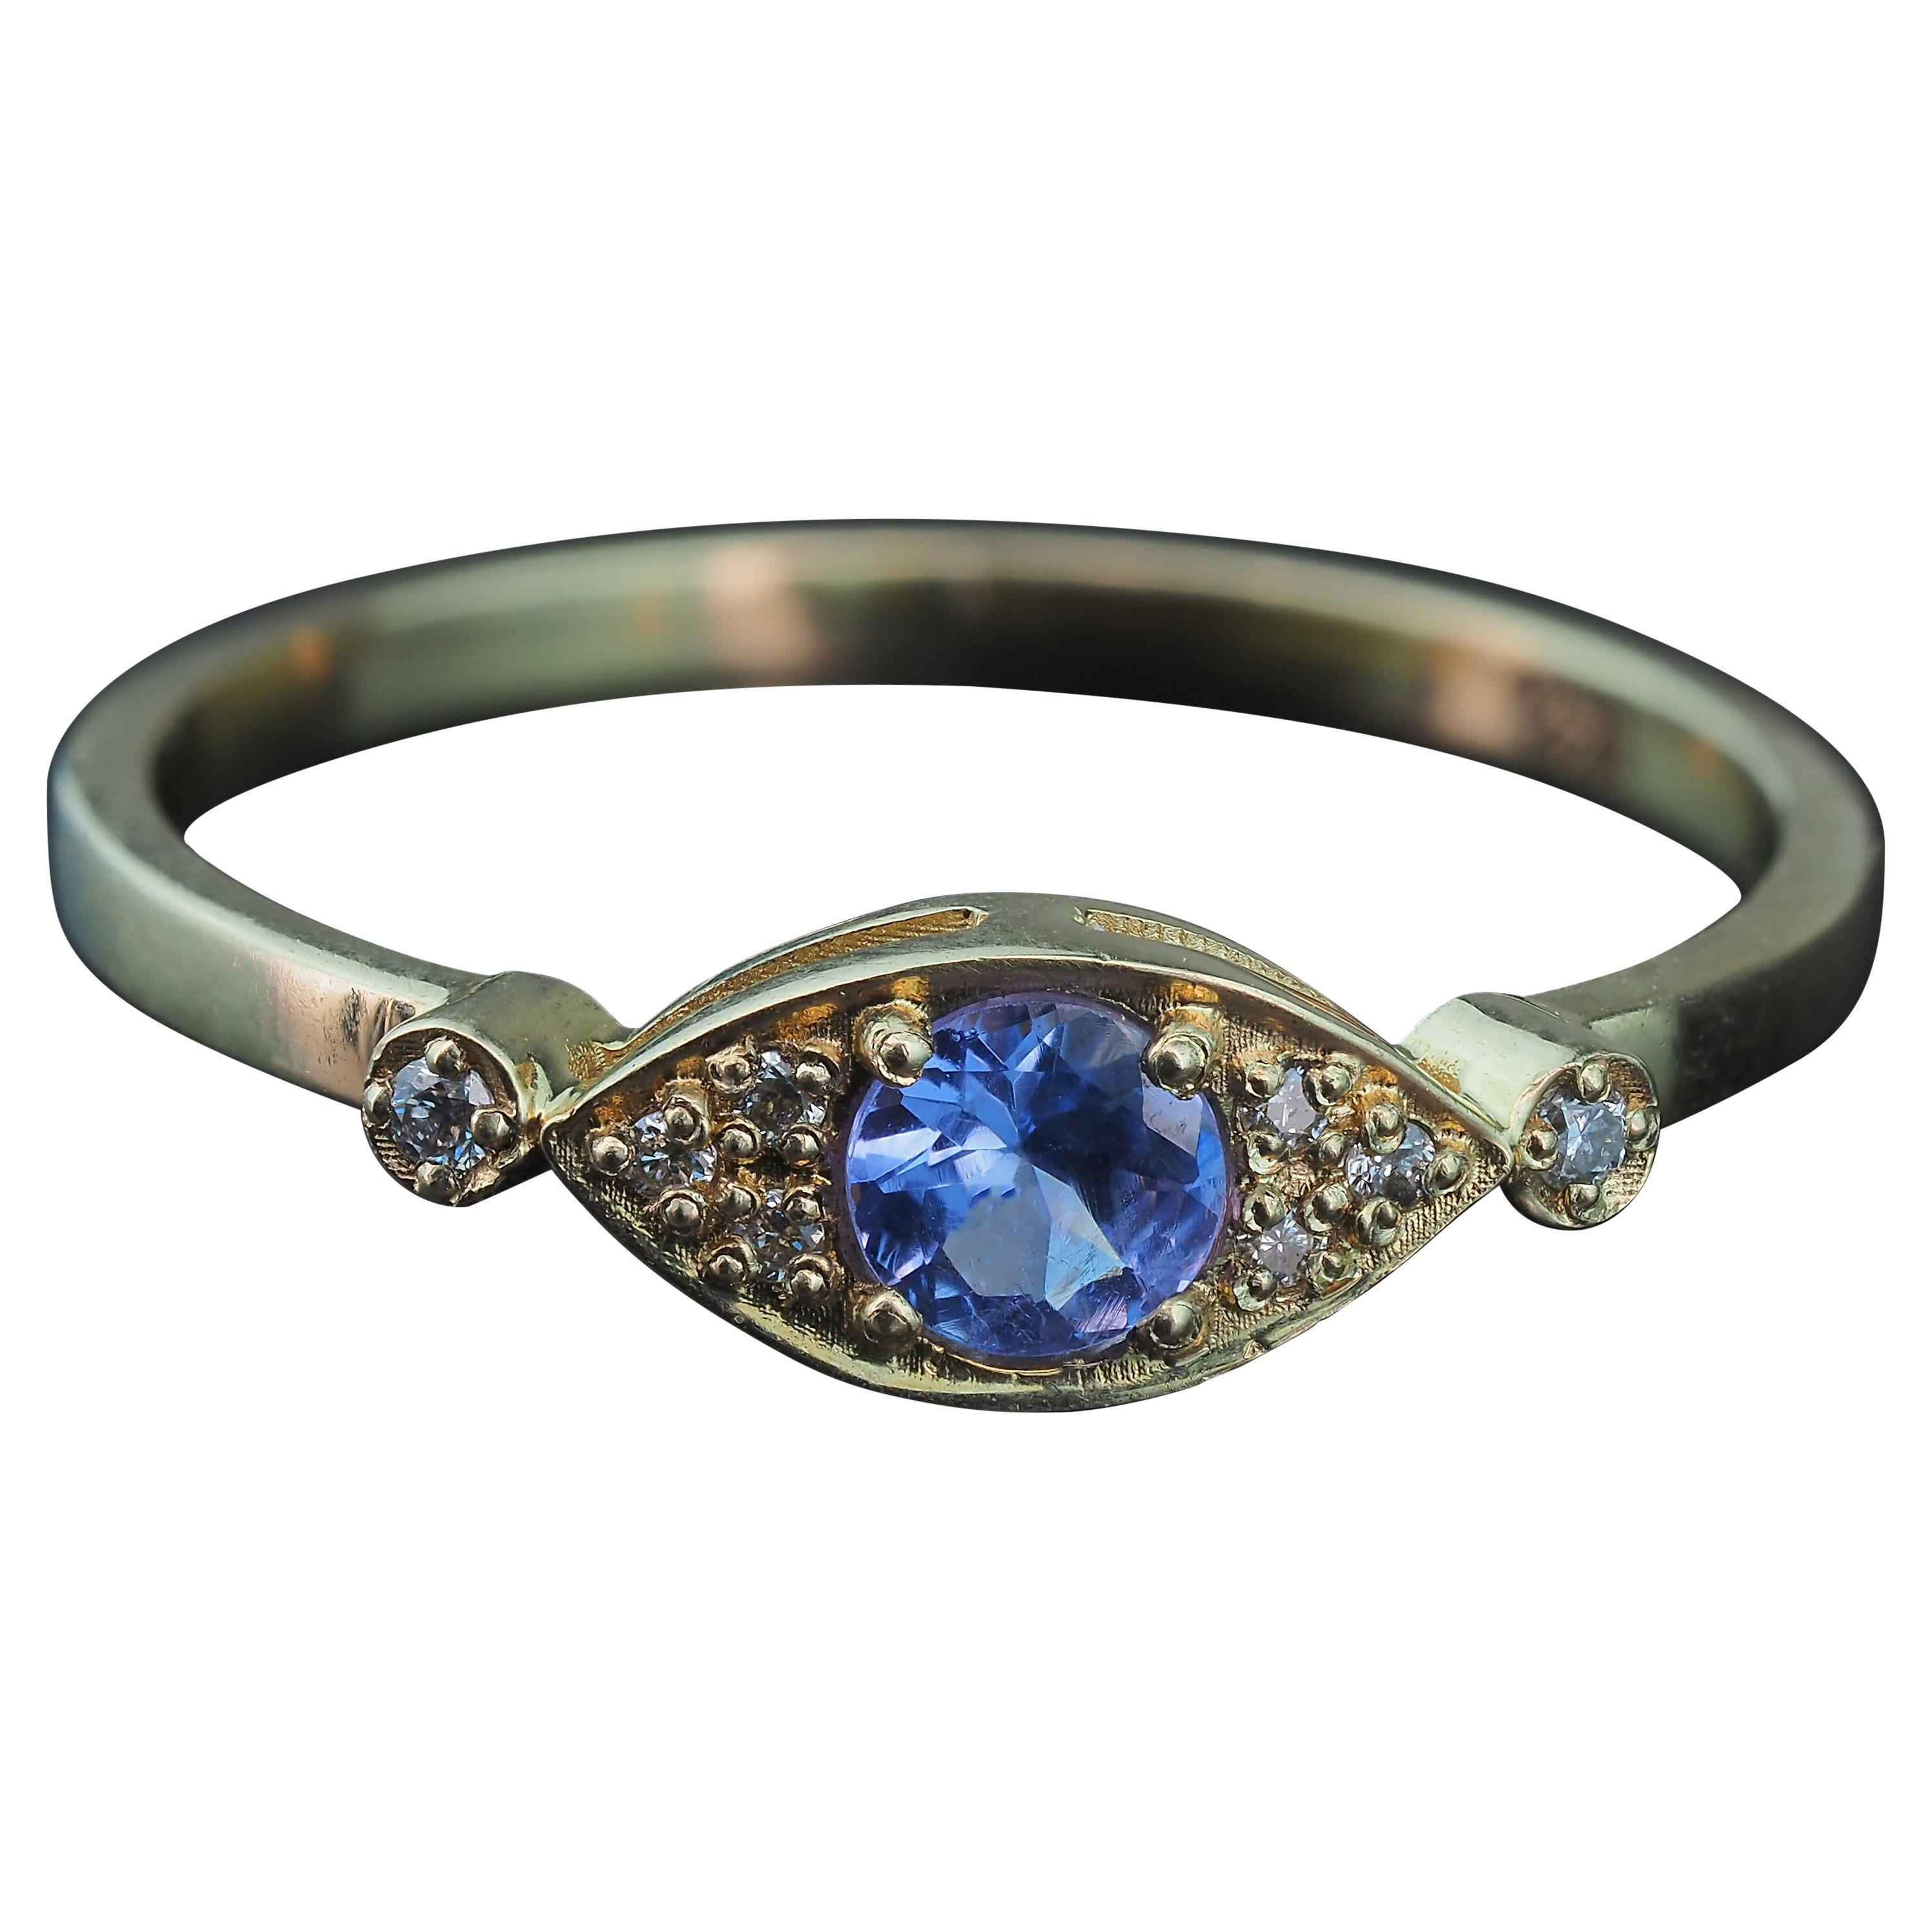 For Sale:  14k Gold "Eye" Ring with Tanzanite and Diamonds